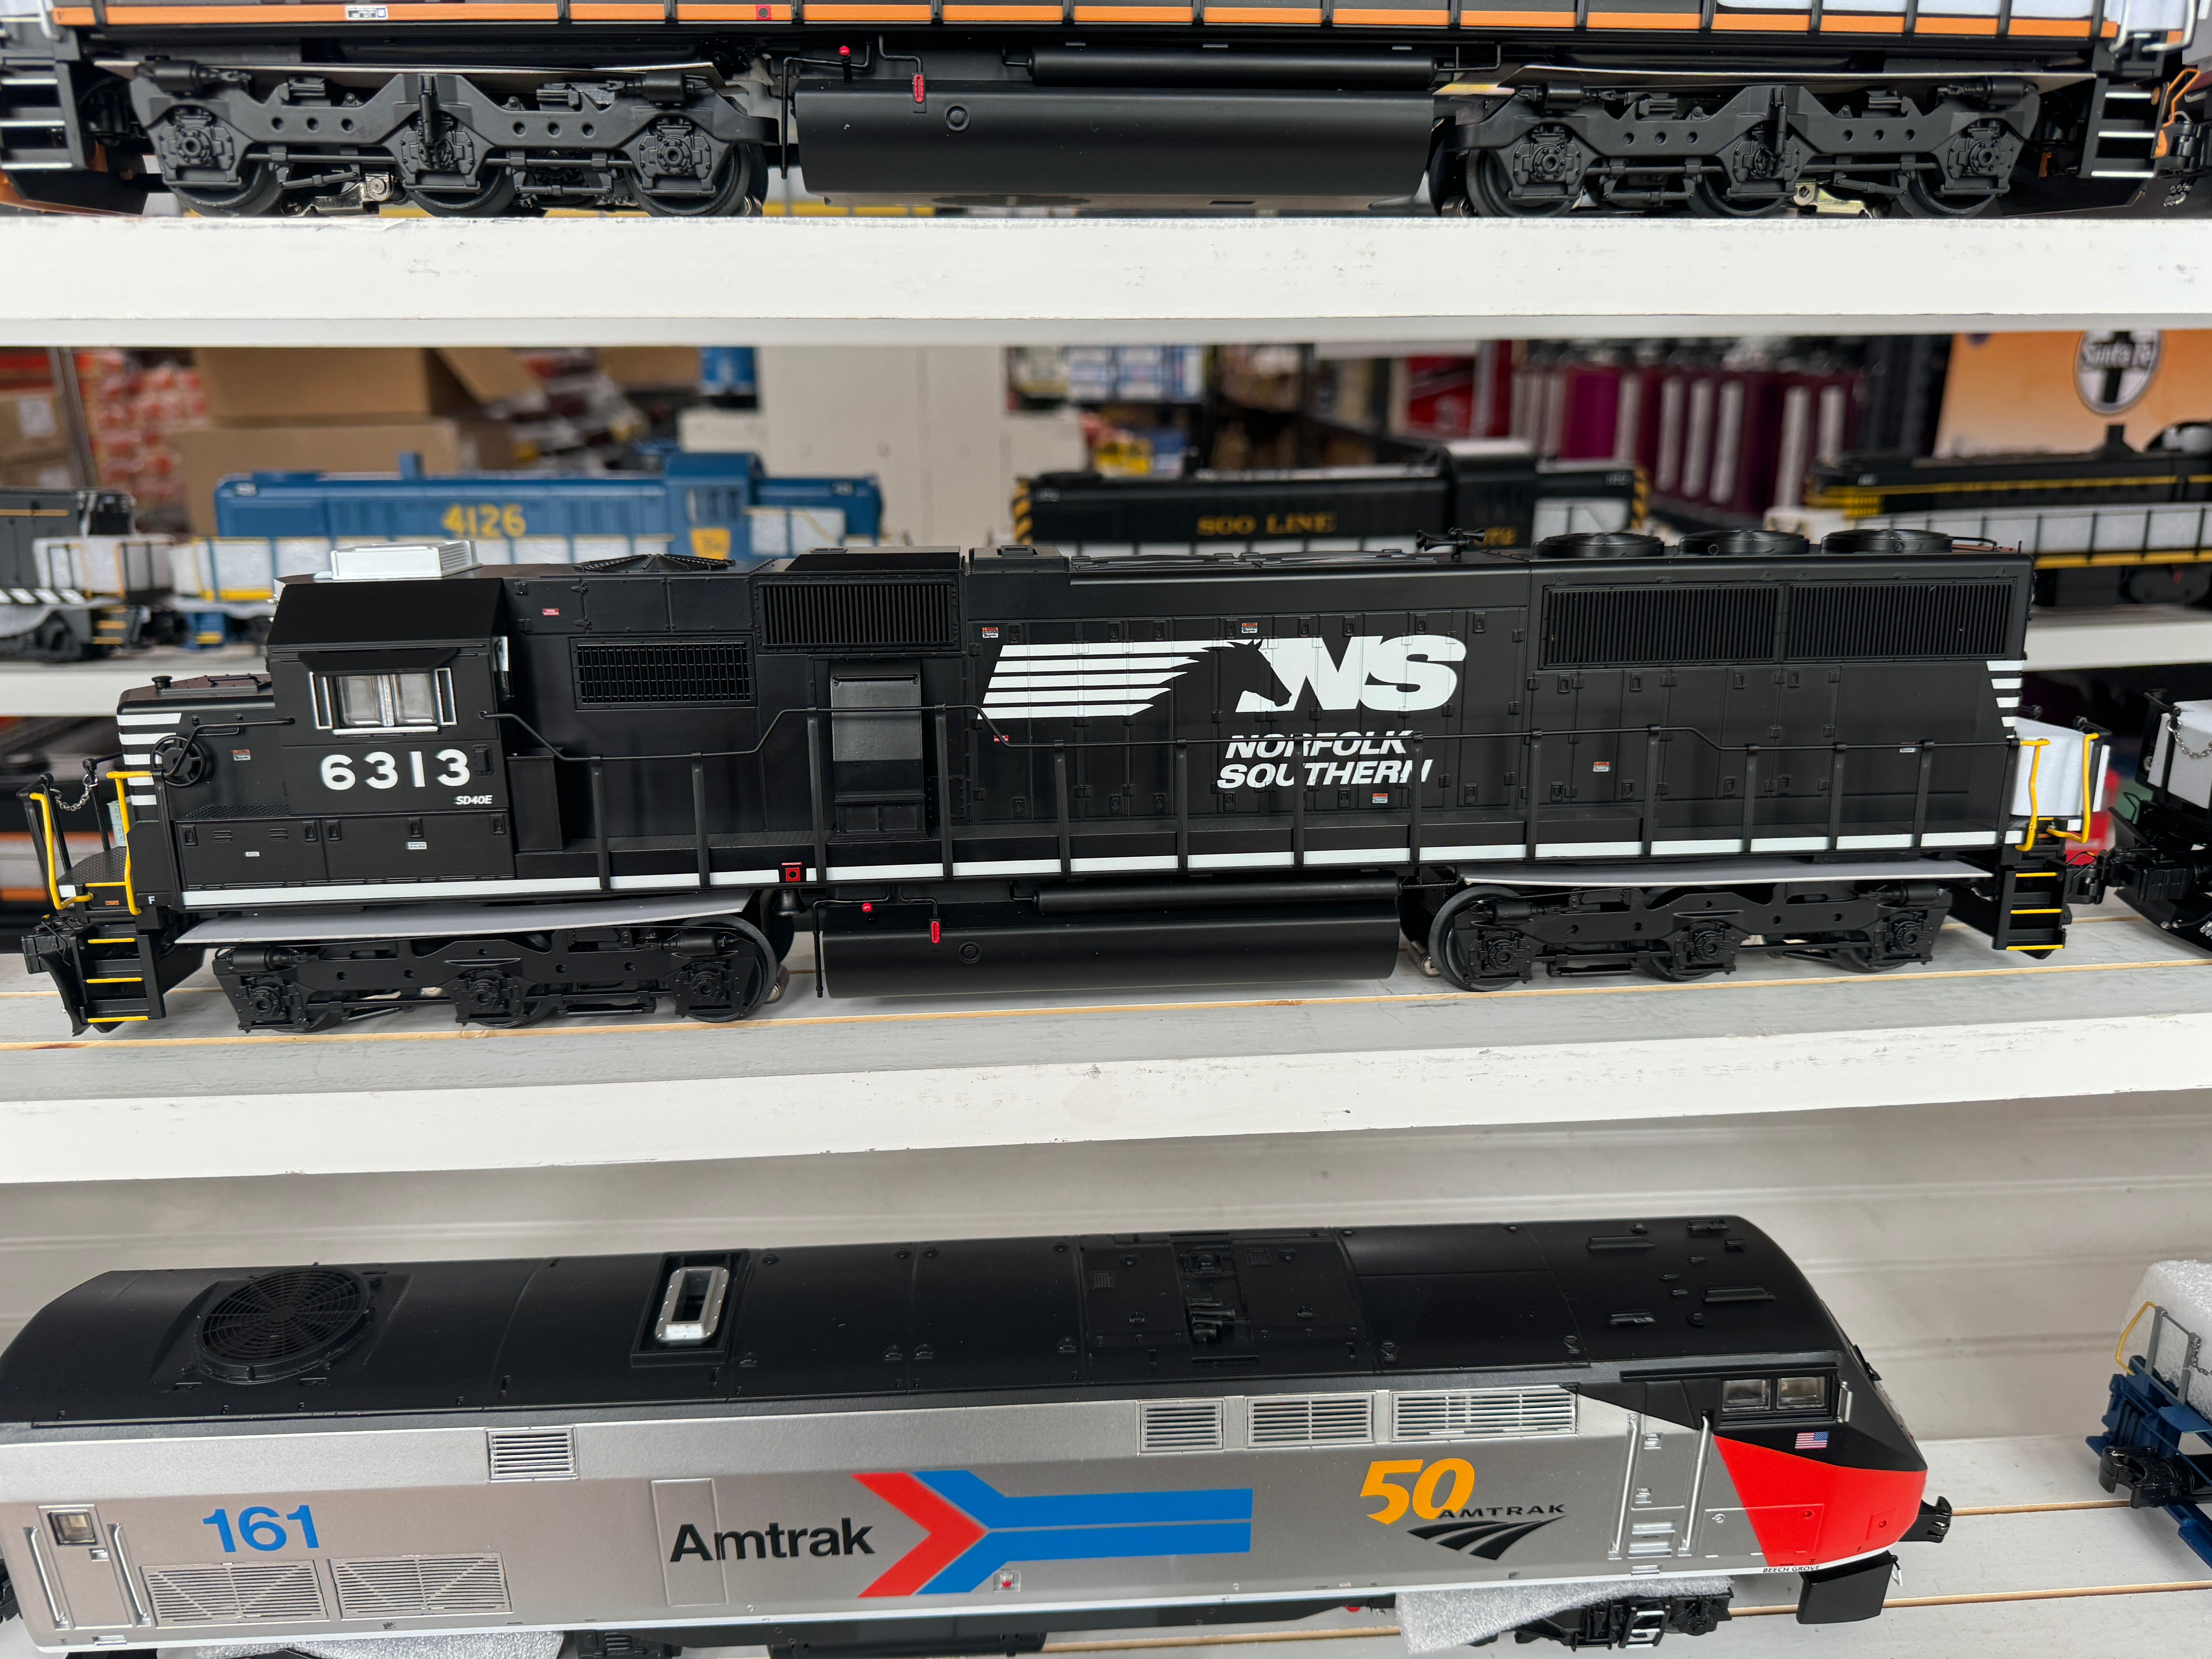 Lionel 2433281 - Legacy SD40E Diesel Engine "Norfolk Southern" #6313